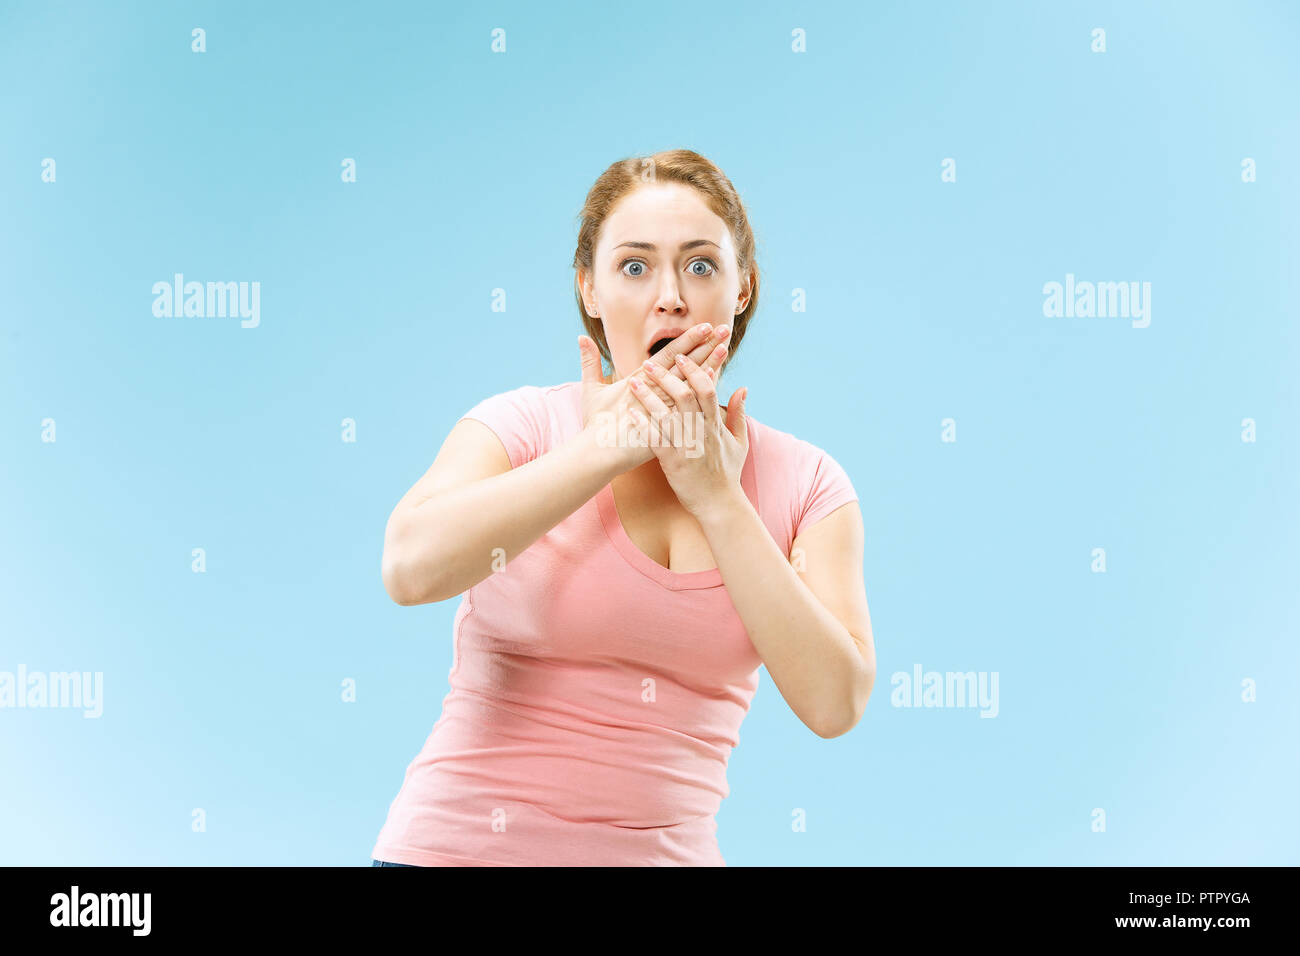 I'm afraid. Fright. Portrait of the scared woman. Business woman standing isolated on trendy blue studio background. Female half-length portrait. Human emotions, facial expression concept. Stock Photo